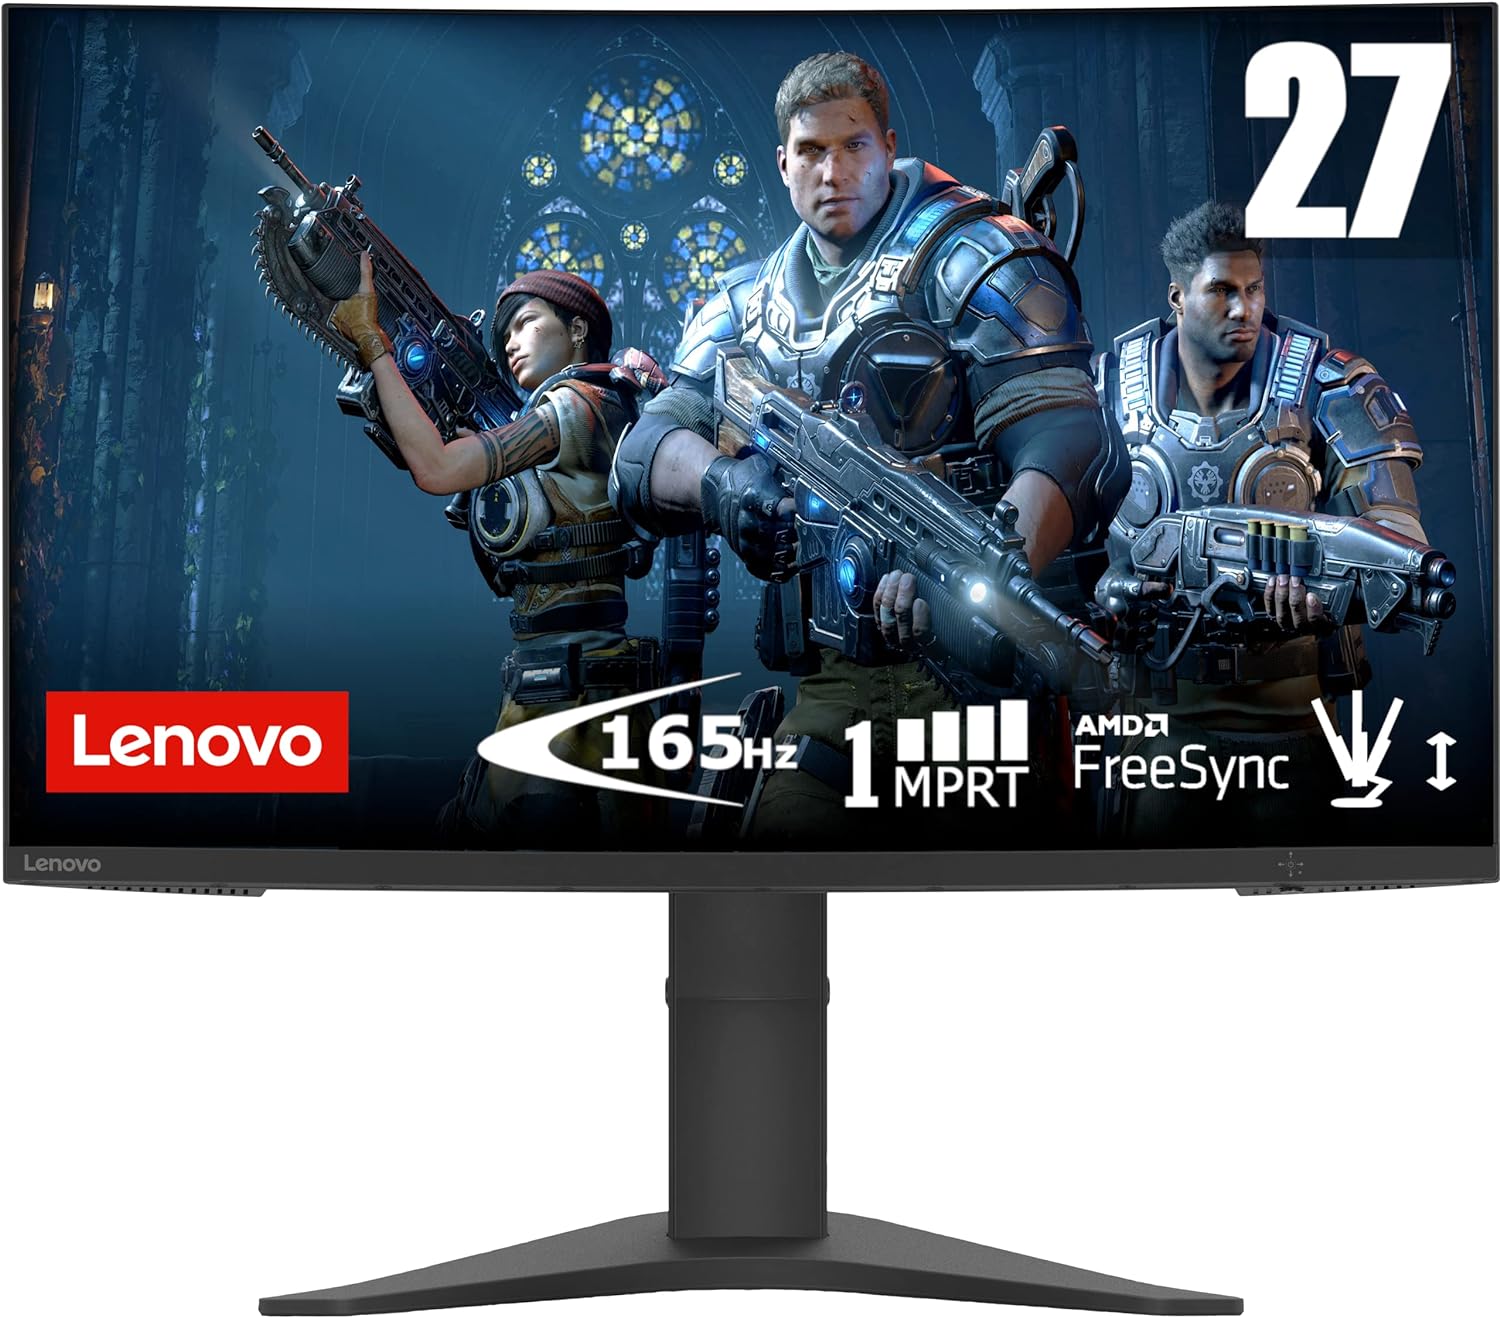 Lenovo G27c 27 VA Monitor - Immerse yourself in games with 1500R curvature and 165Hz refresh rate. 0194552877538